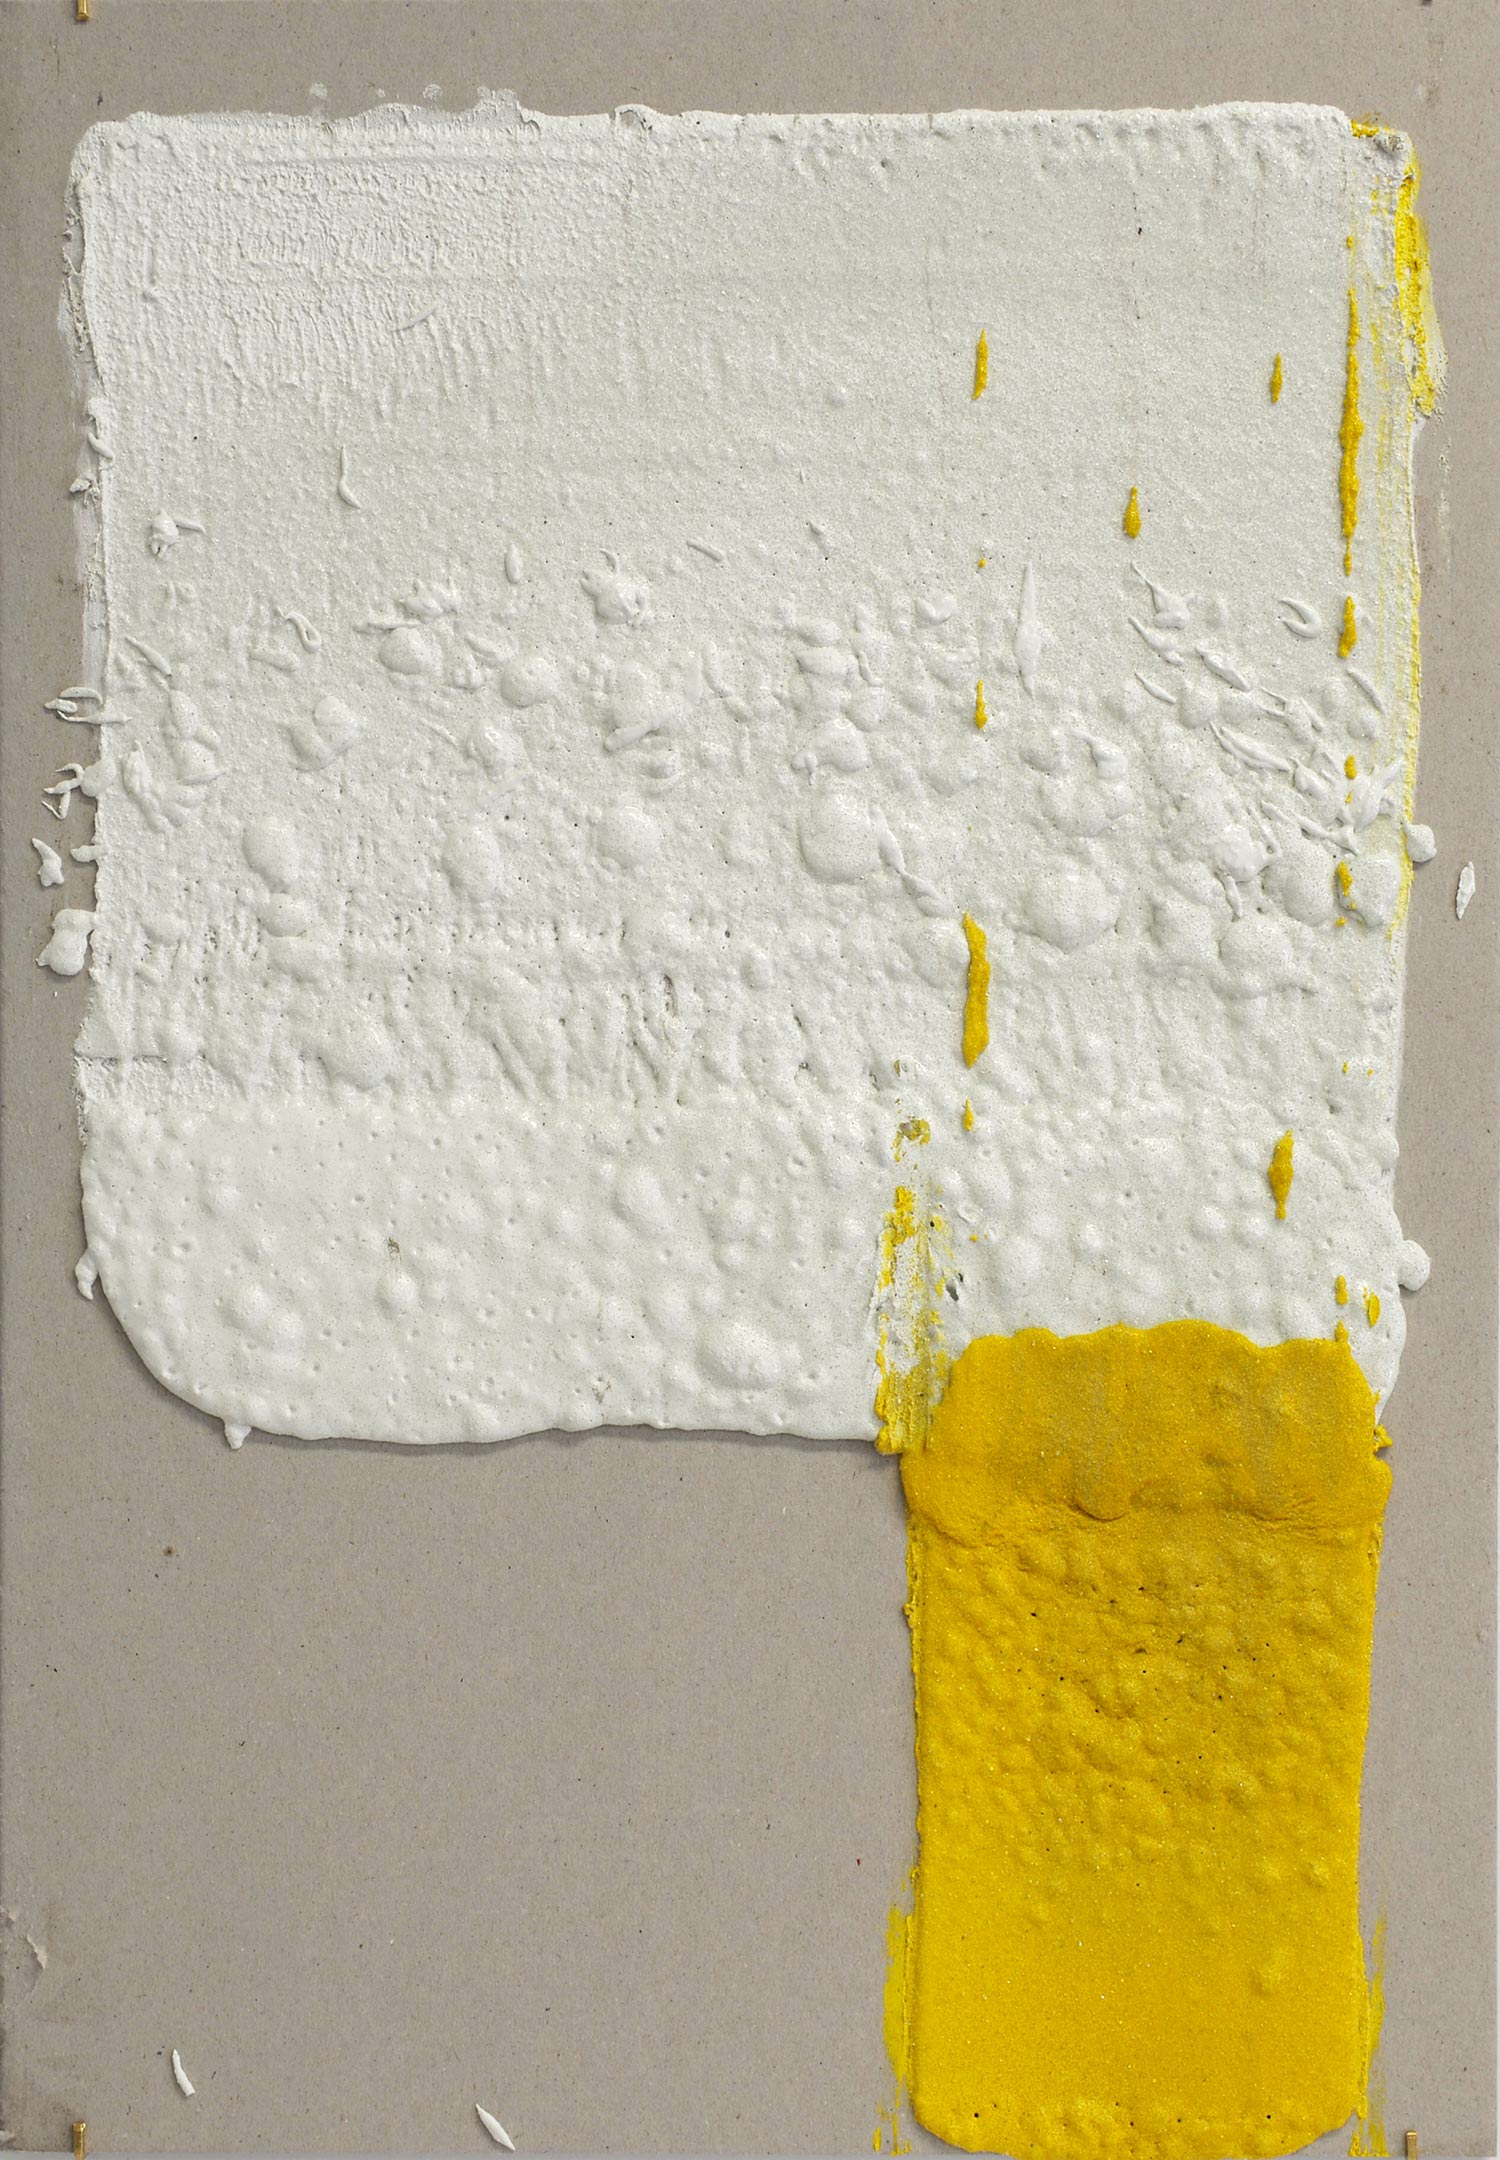   12in (section) (W), 2.27mm (T), White, Crosswalk, Hand marking; 4in (section) (W), 2.27mm (T), Yellow, Double Yellow continuous, Manual marking, Lewis St, Btw Delancey St - Grand St,  2018 Thermoplastic paint, reflective glass particles on grey boa